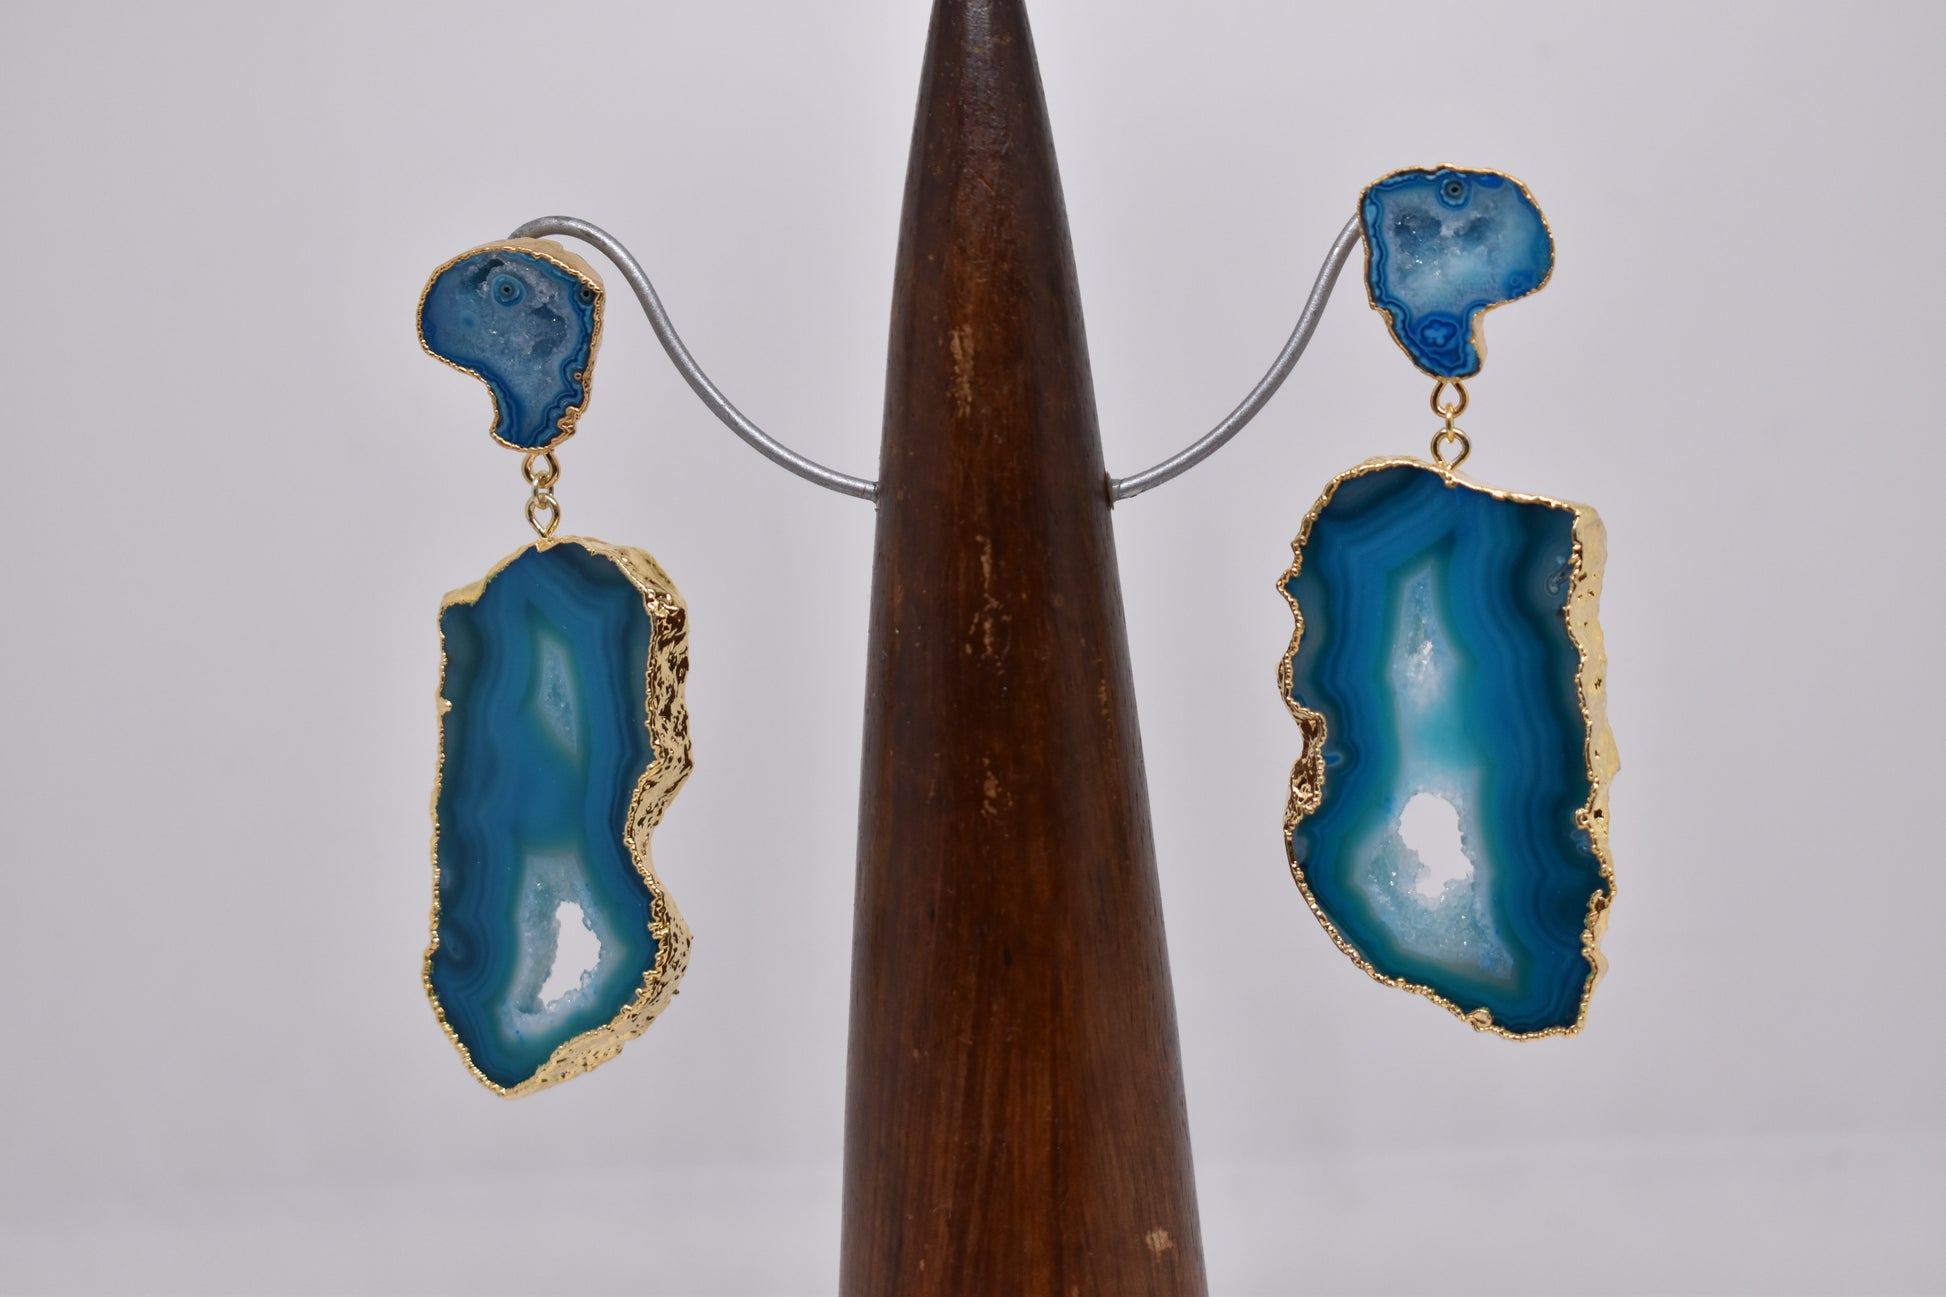 Geode Agate with Agate Slice Earrings available in a variety of fabulous colours - Violet Elizabeth